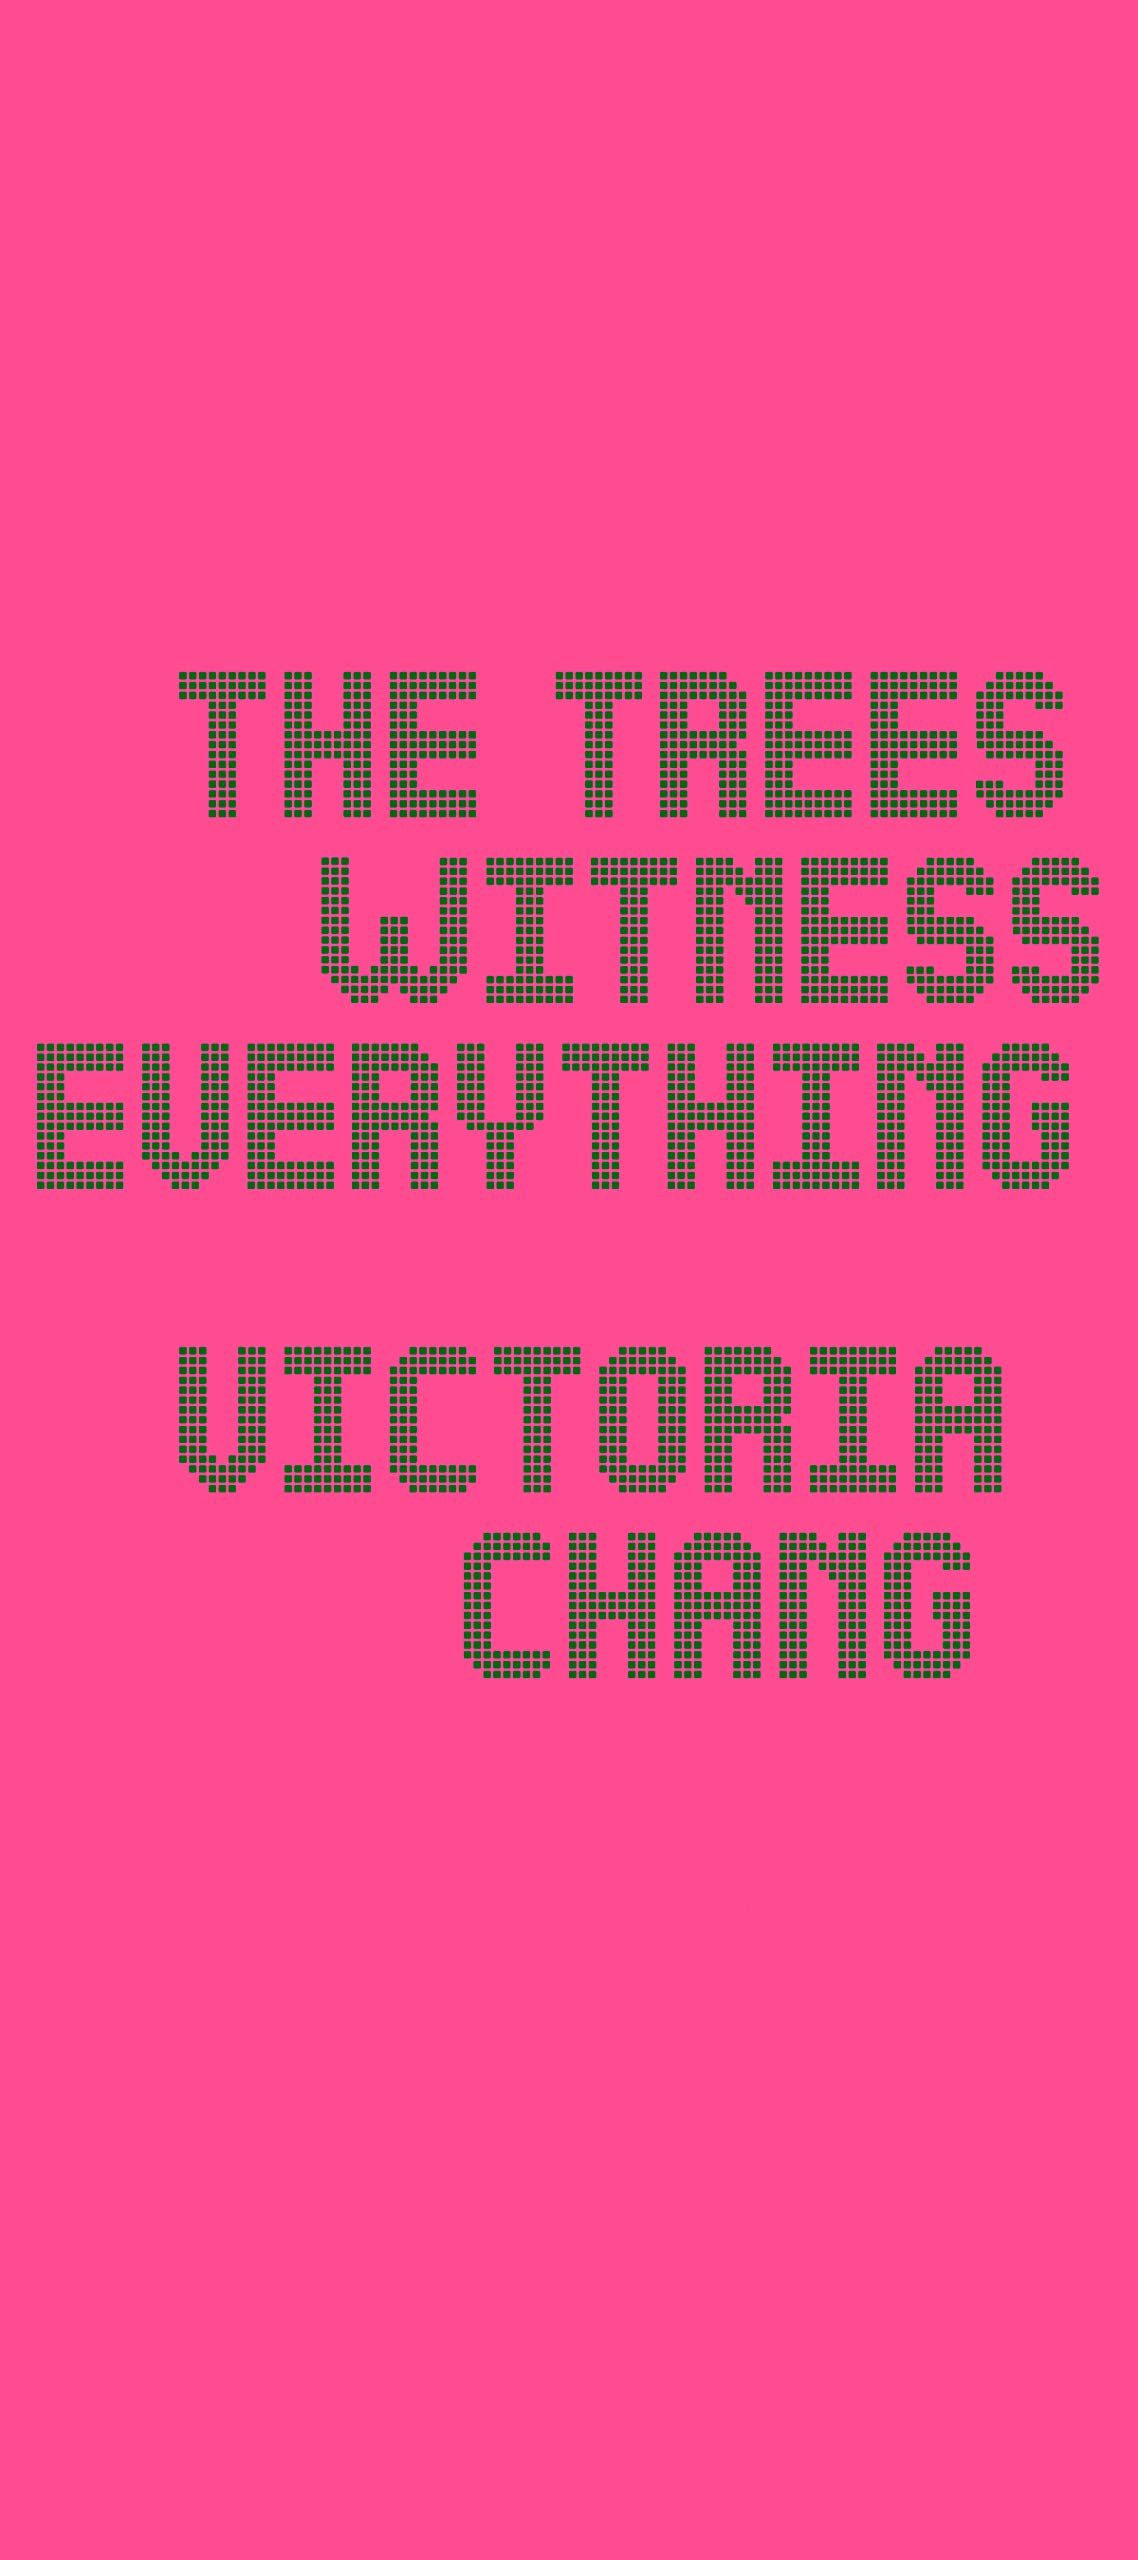 Trees Witness Everything cover by Victoria Chang